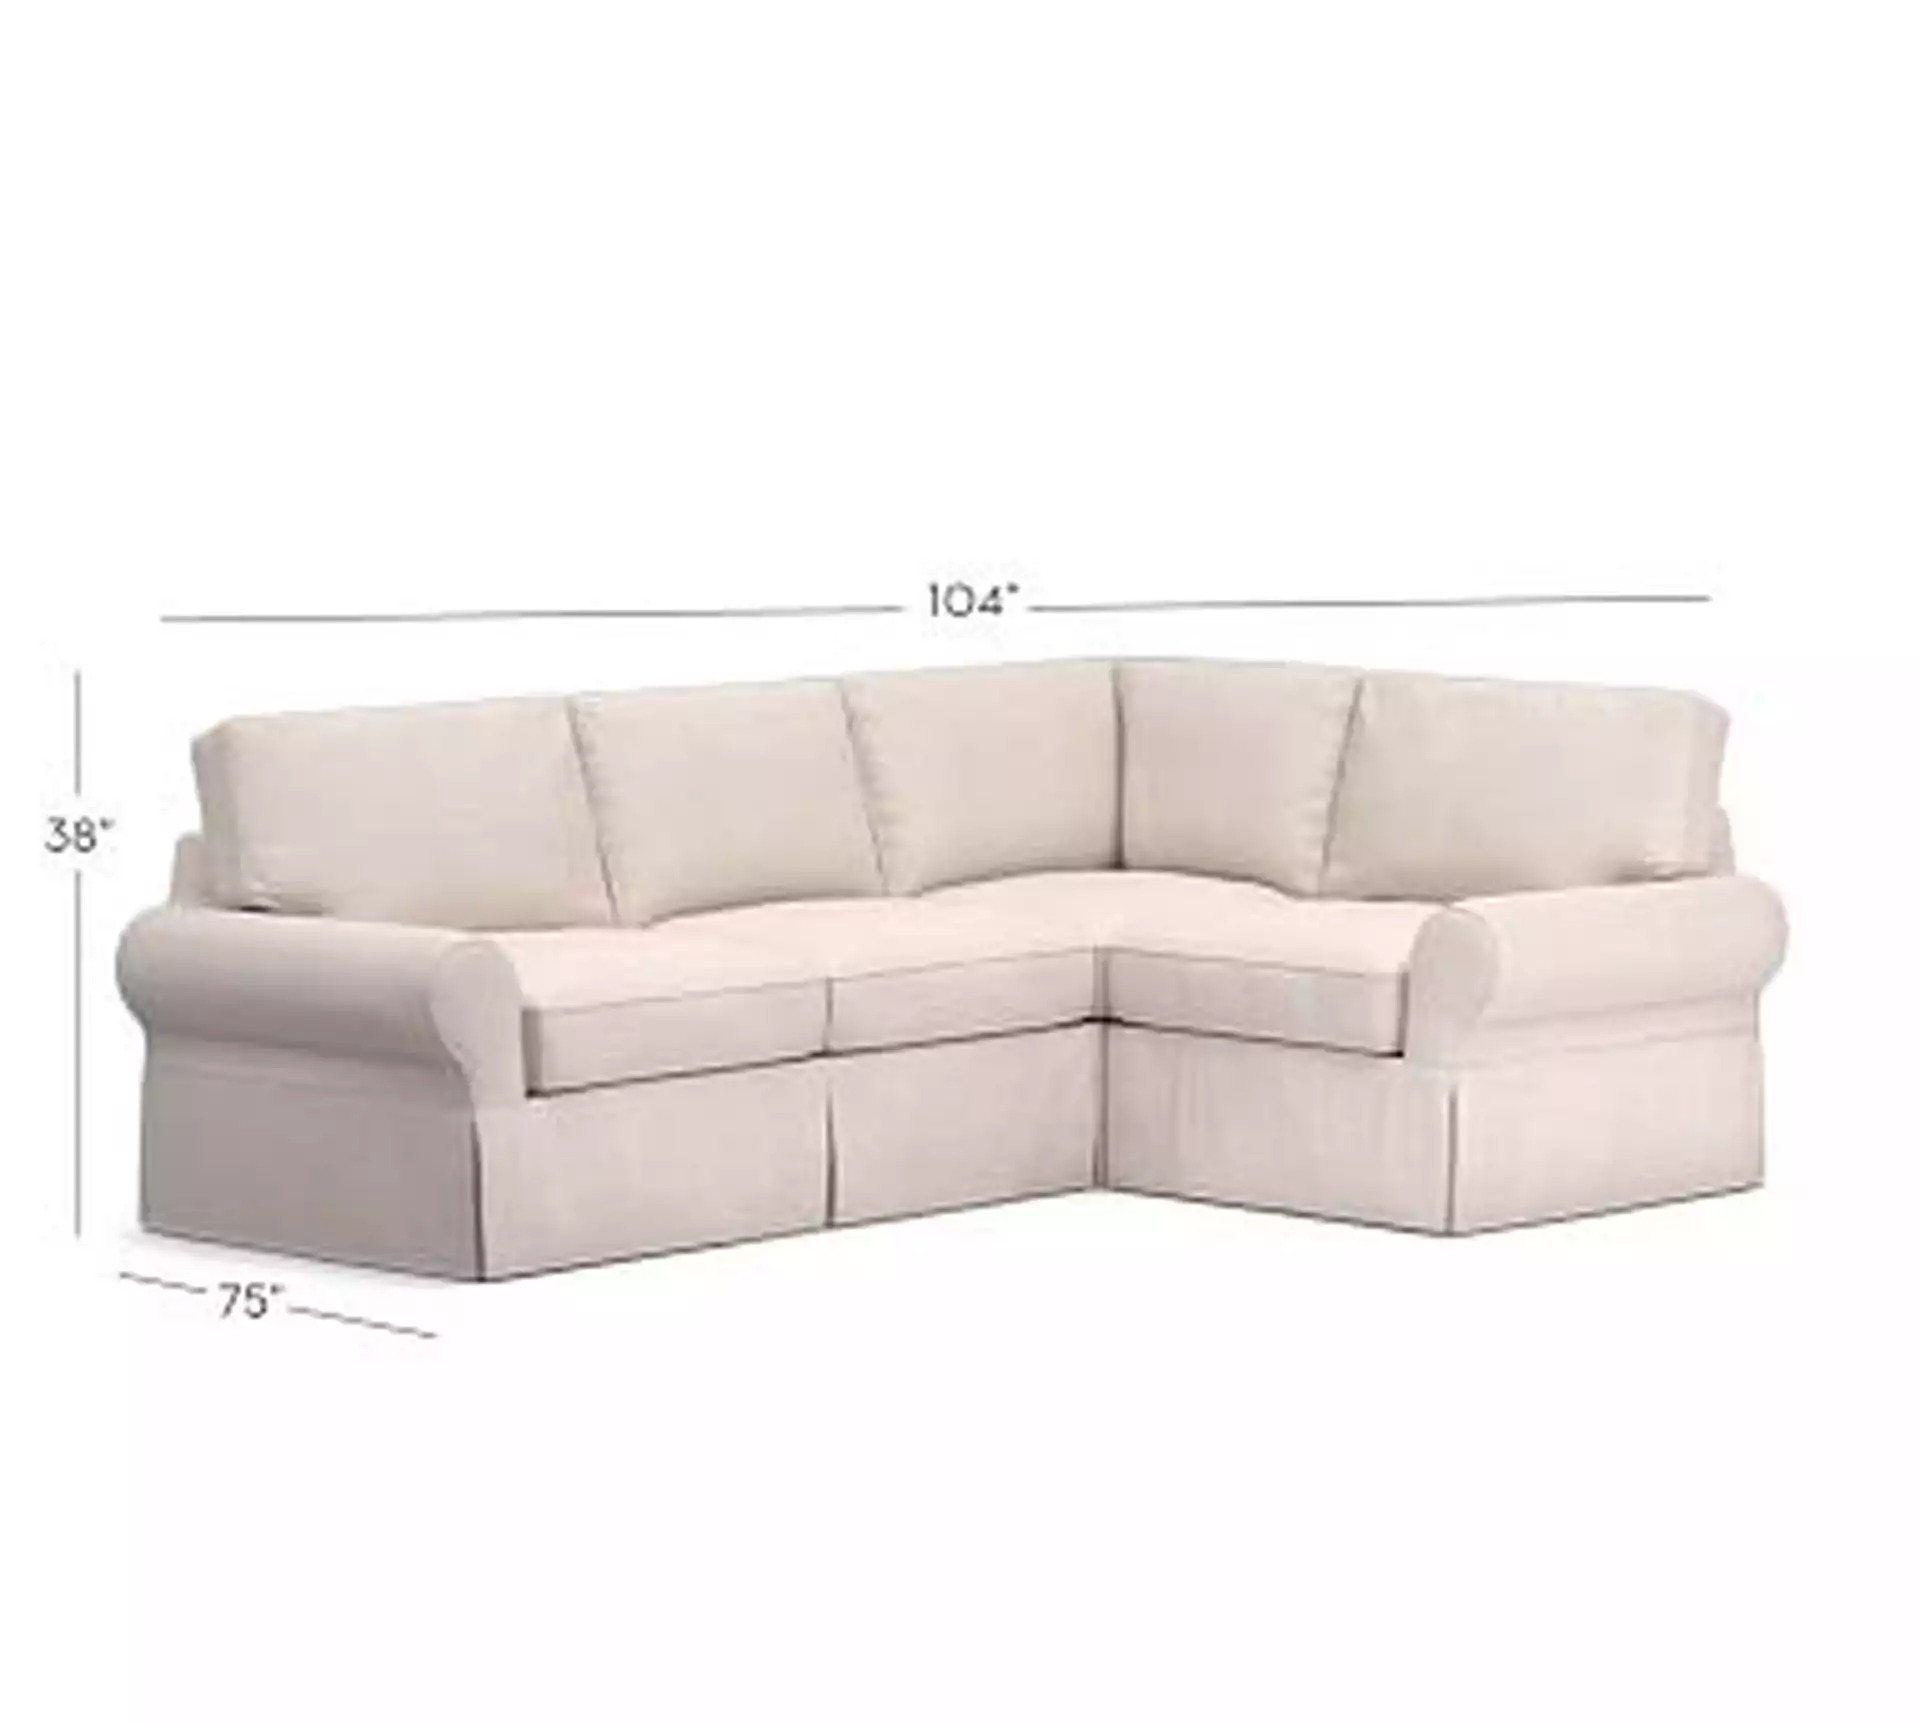 PB Basic Slipcovered Left Arm 3-Piece Sectional, Polyester Wrapped Cushions, Park Weave Oatmeal